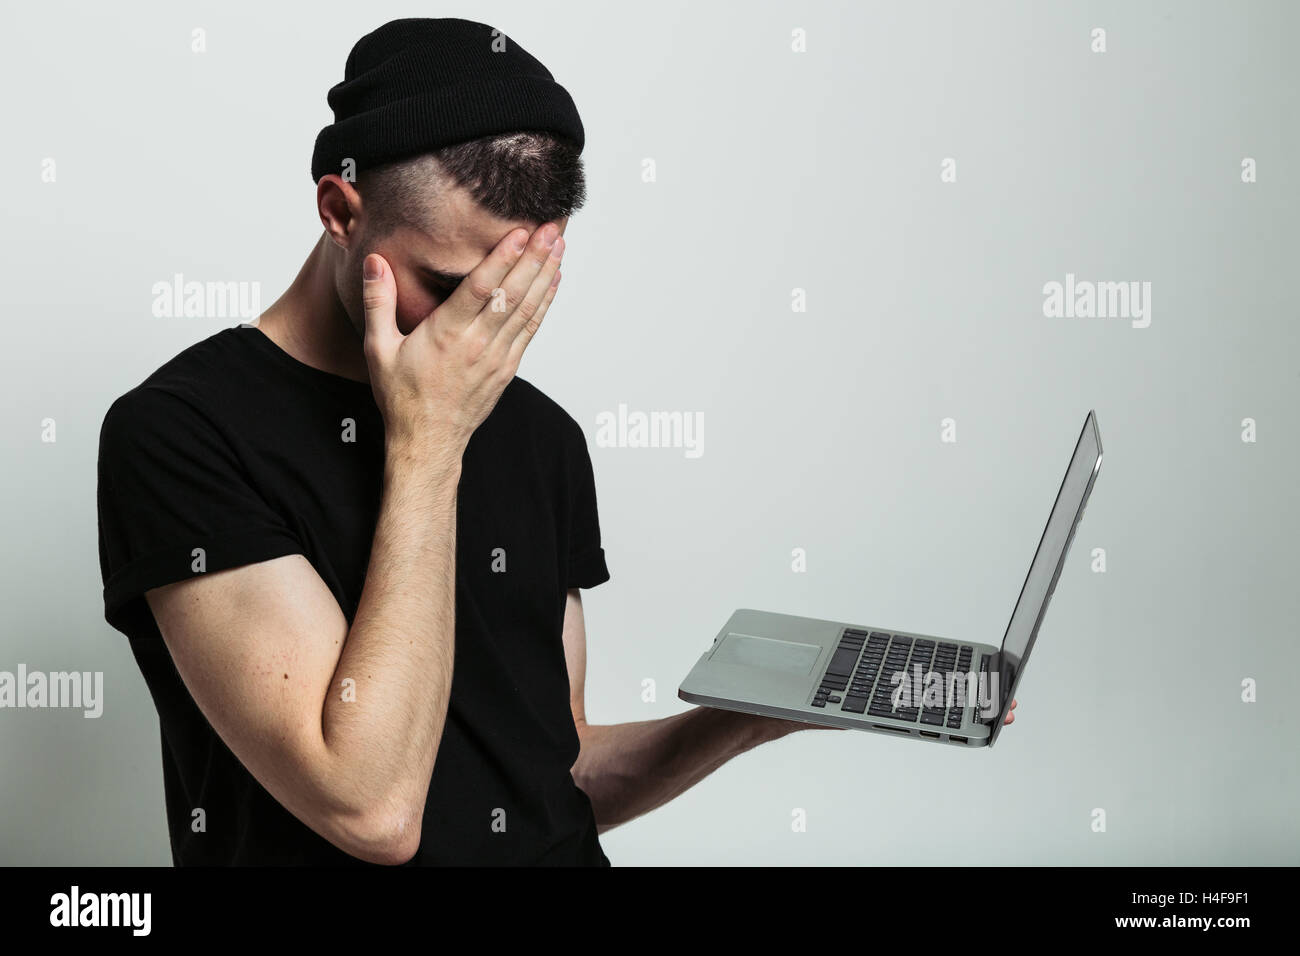 Close up view of man with laptop and facepalm. Stock Photo